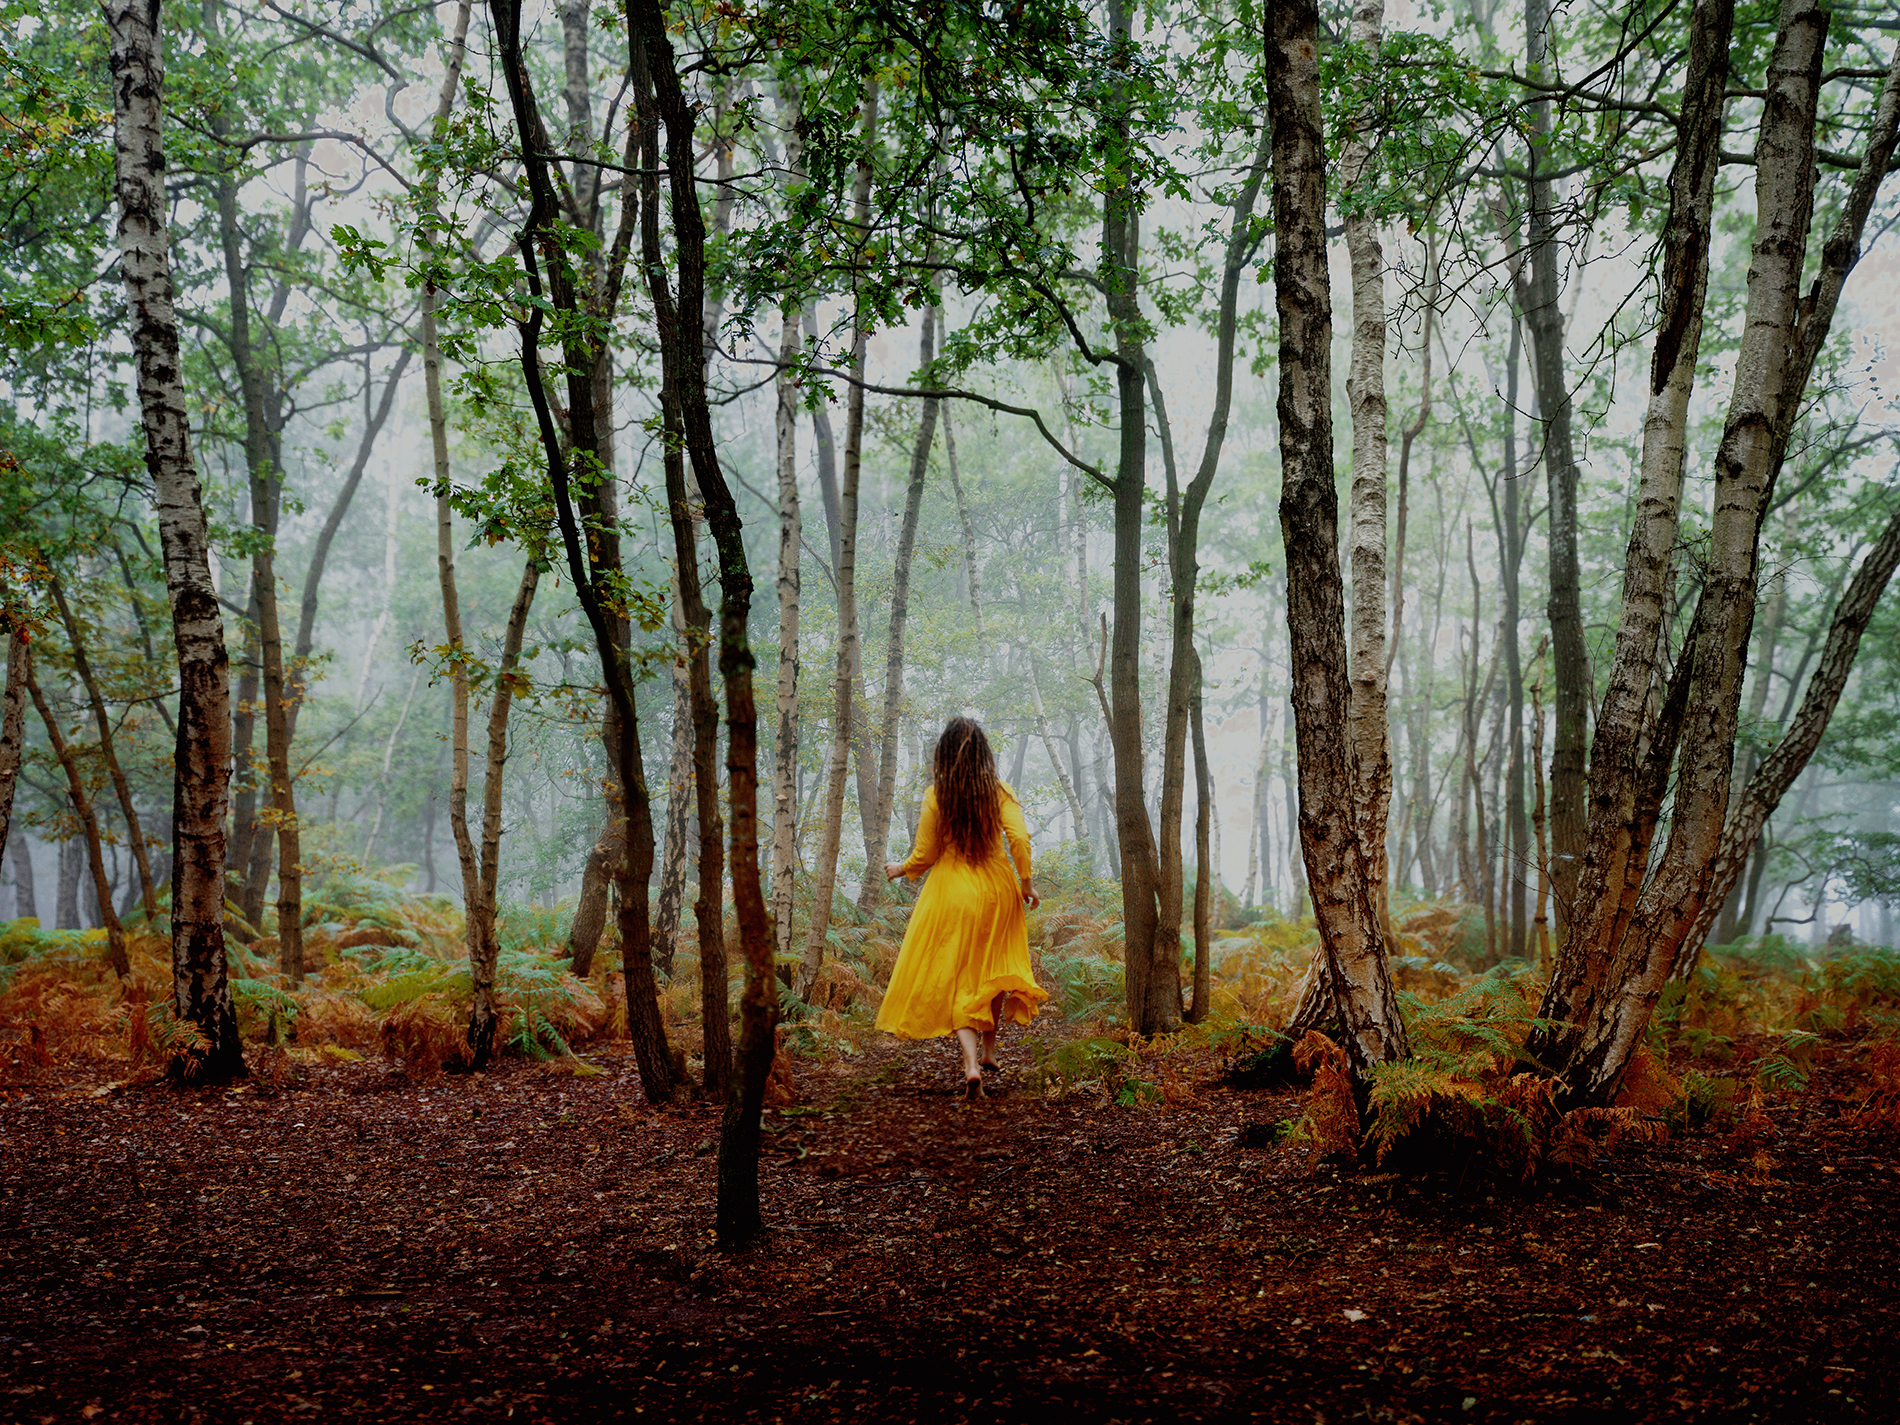 Discover artist date ideas to nurture your creative soul. The image shows a woman running barefoot through the forest.